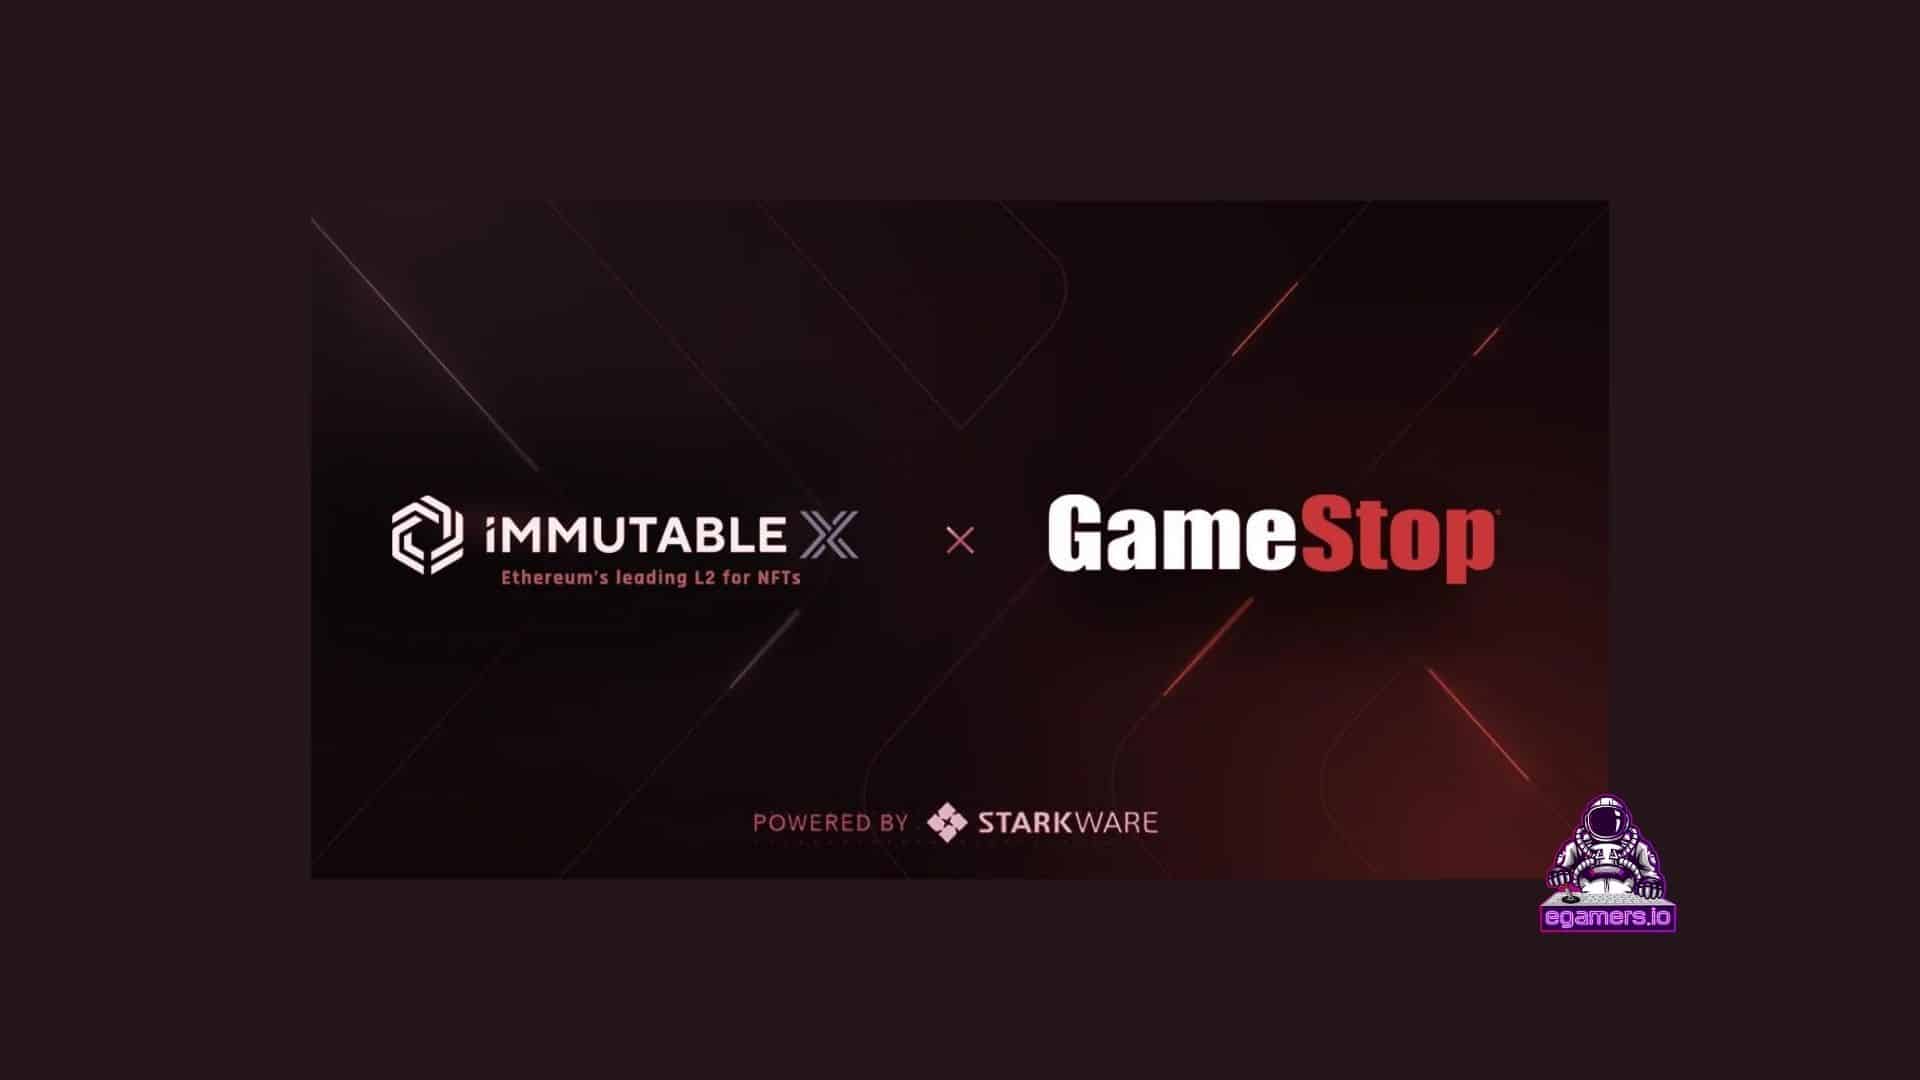 Immutable & GameStop Fund 0M For NFT Marketplace